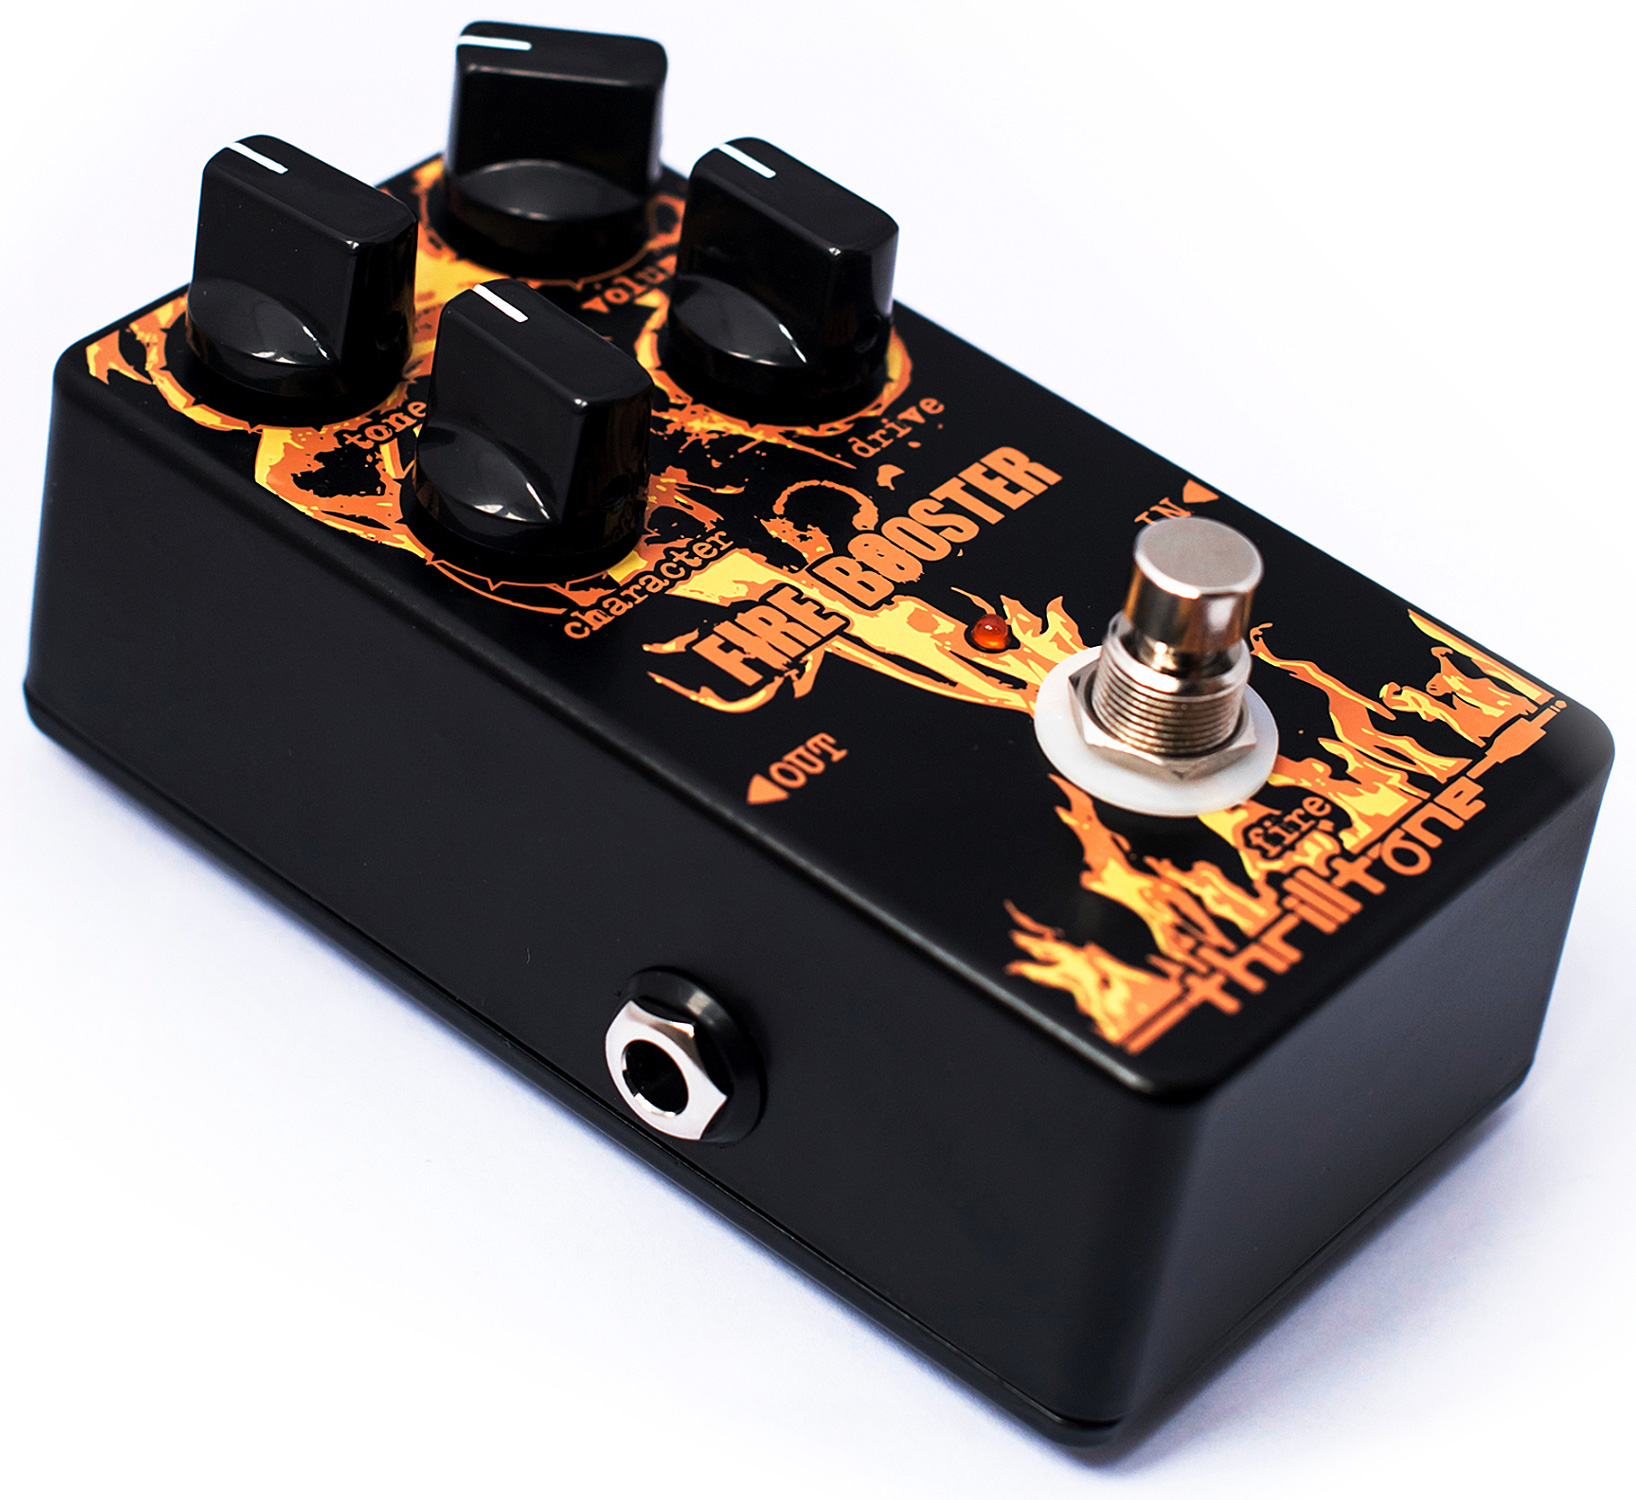 Thrilltone Fire Booster - - Overdrive, distortion & fuzz effect pedal - Variation 1